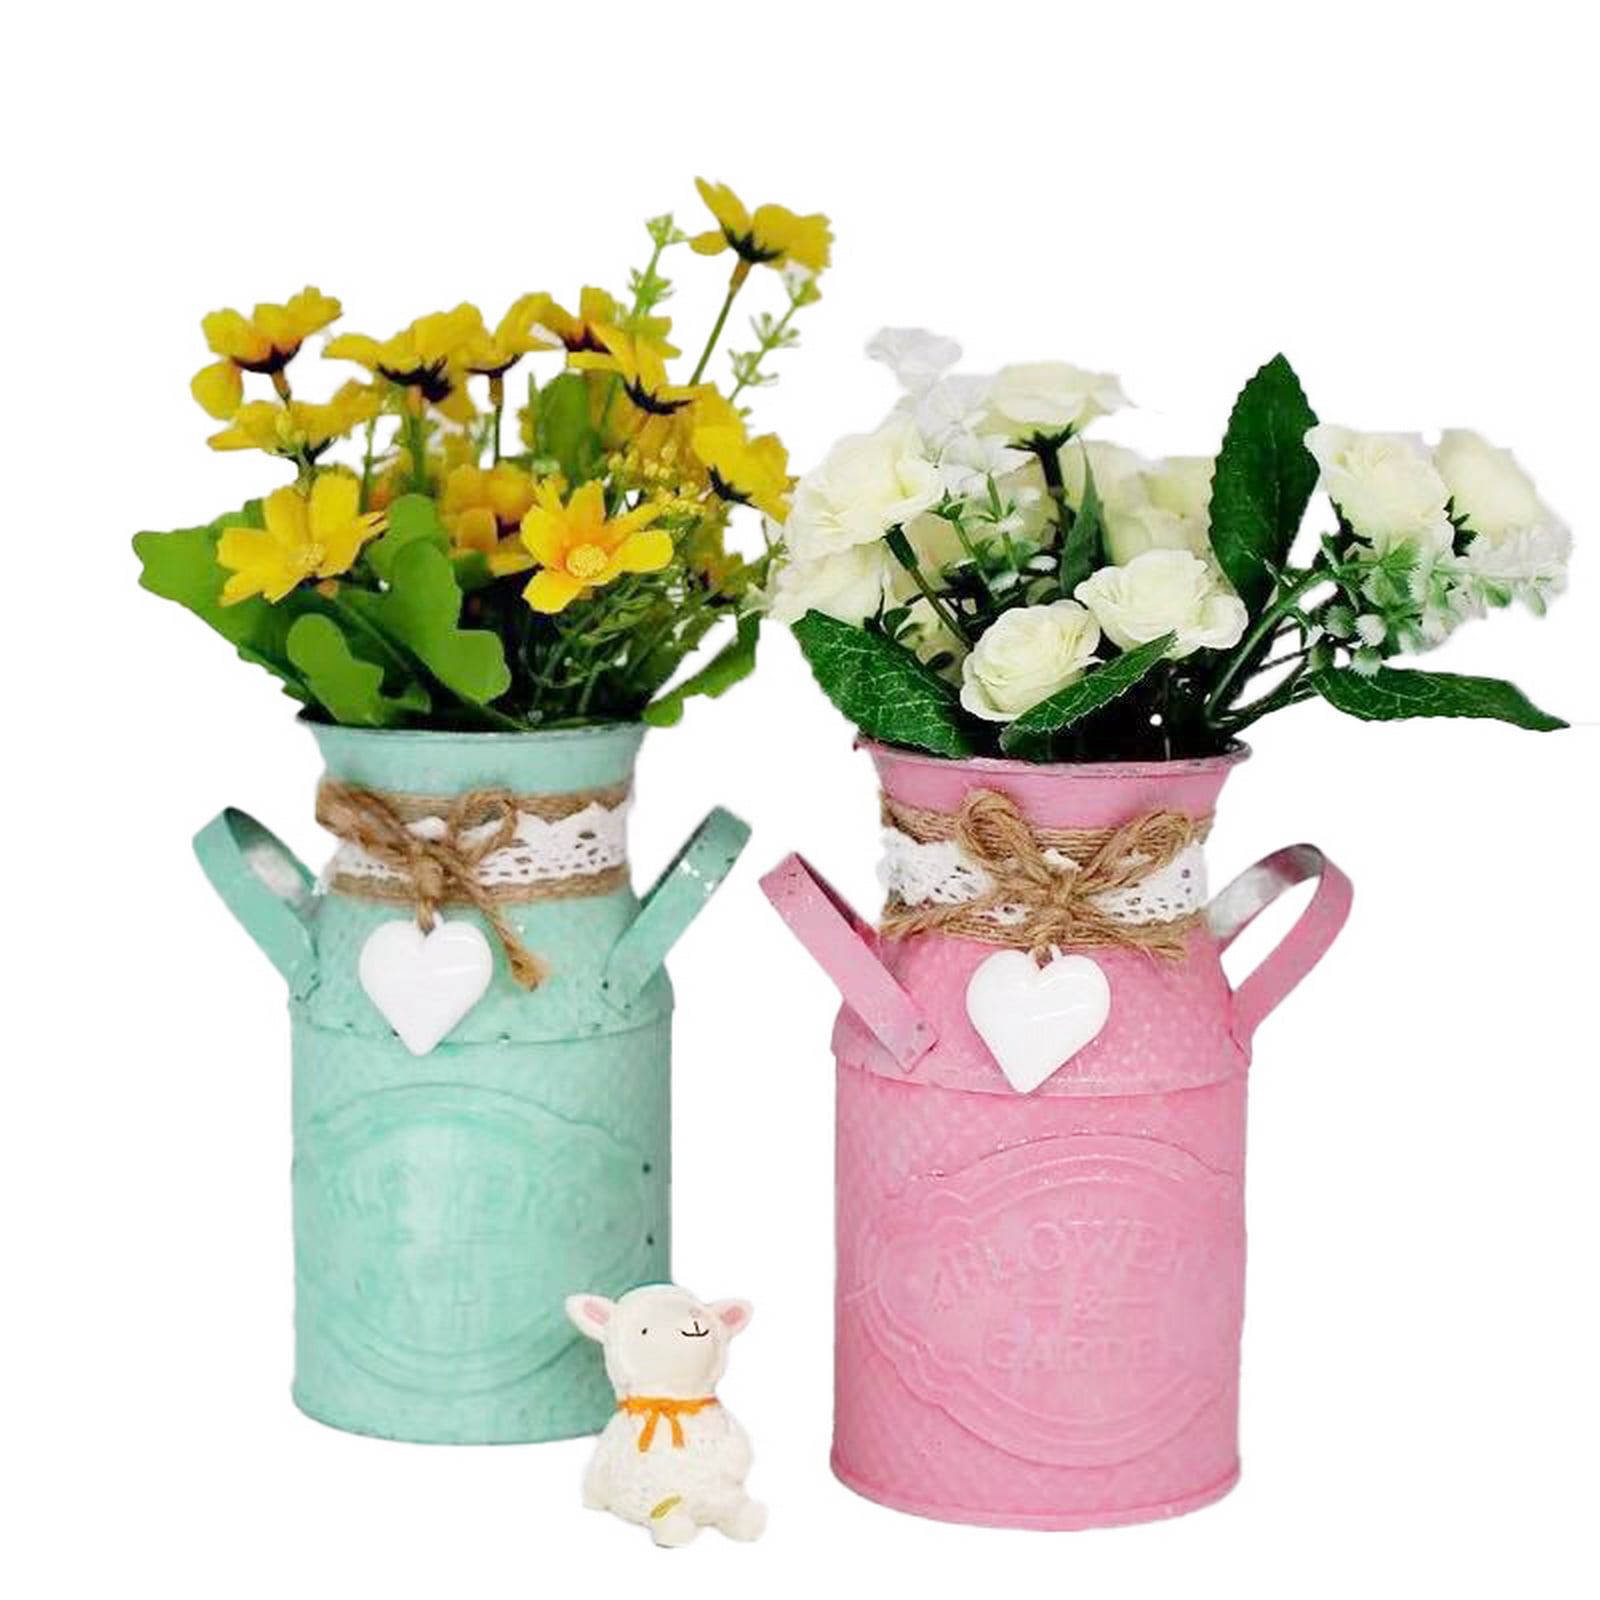 YARDWE 2pcs French Style Flower Vase Shabby Chic Milk Can Galvanized Metal Flowers Bucket Rustic Pitcher Jug Plant Container for Home Garden Farmhouse Decor 